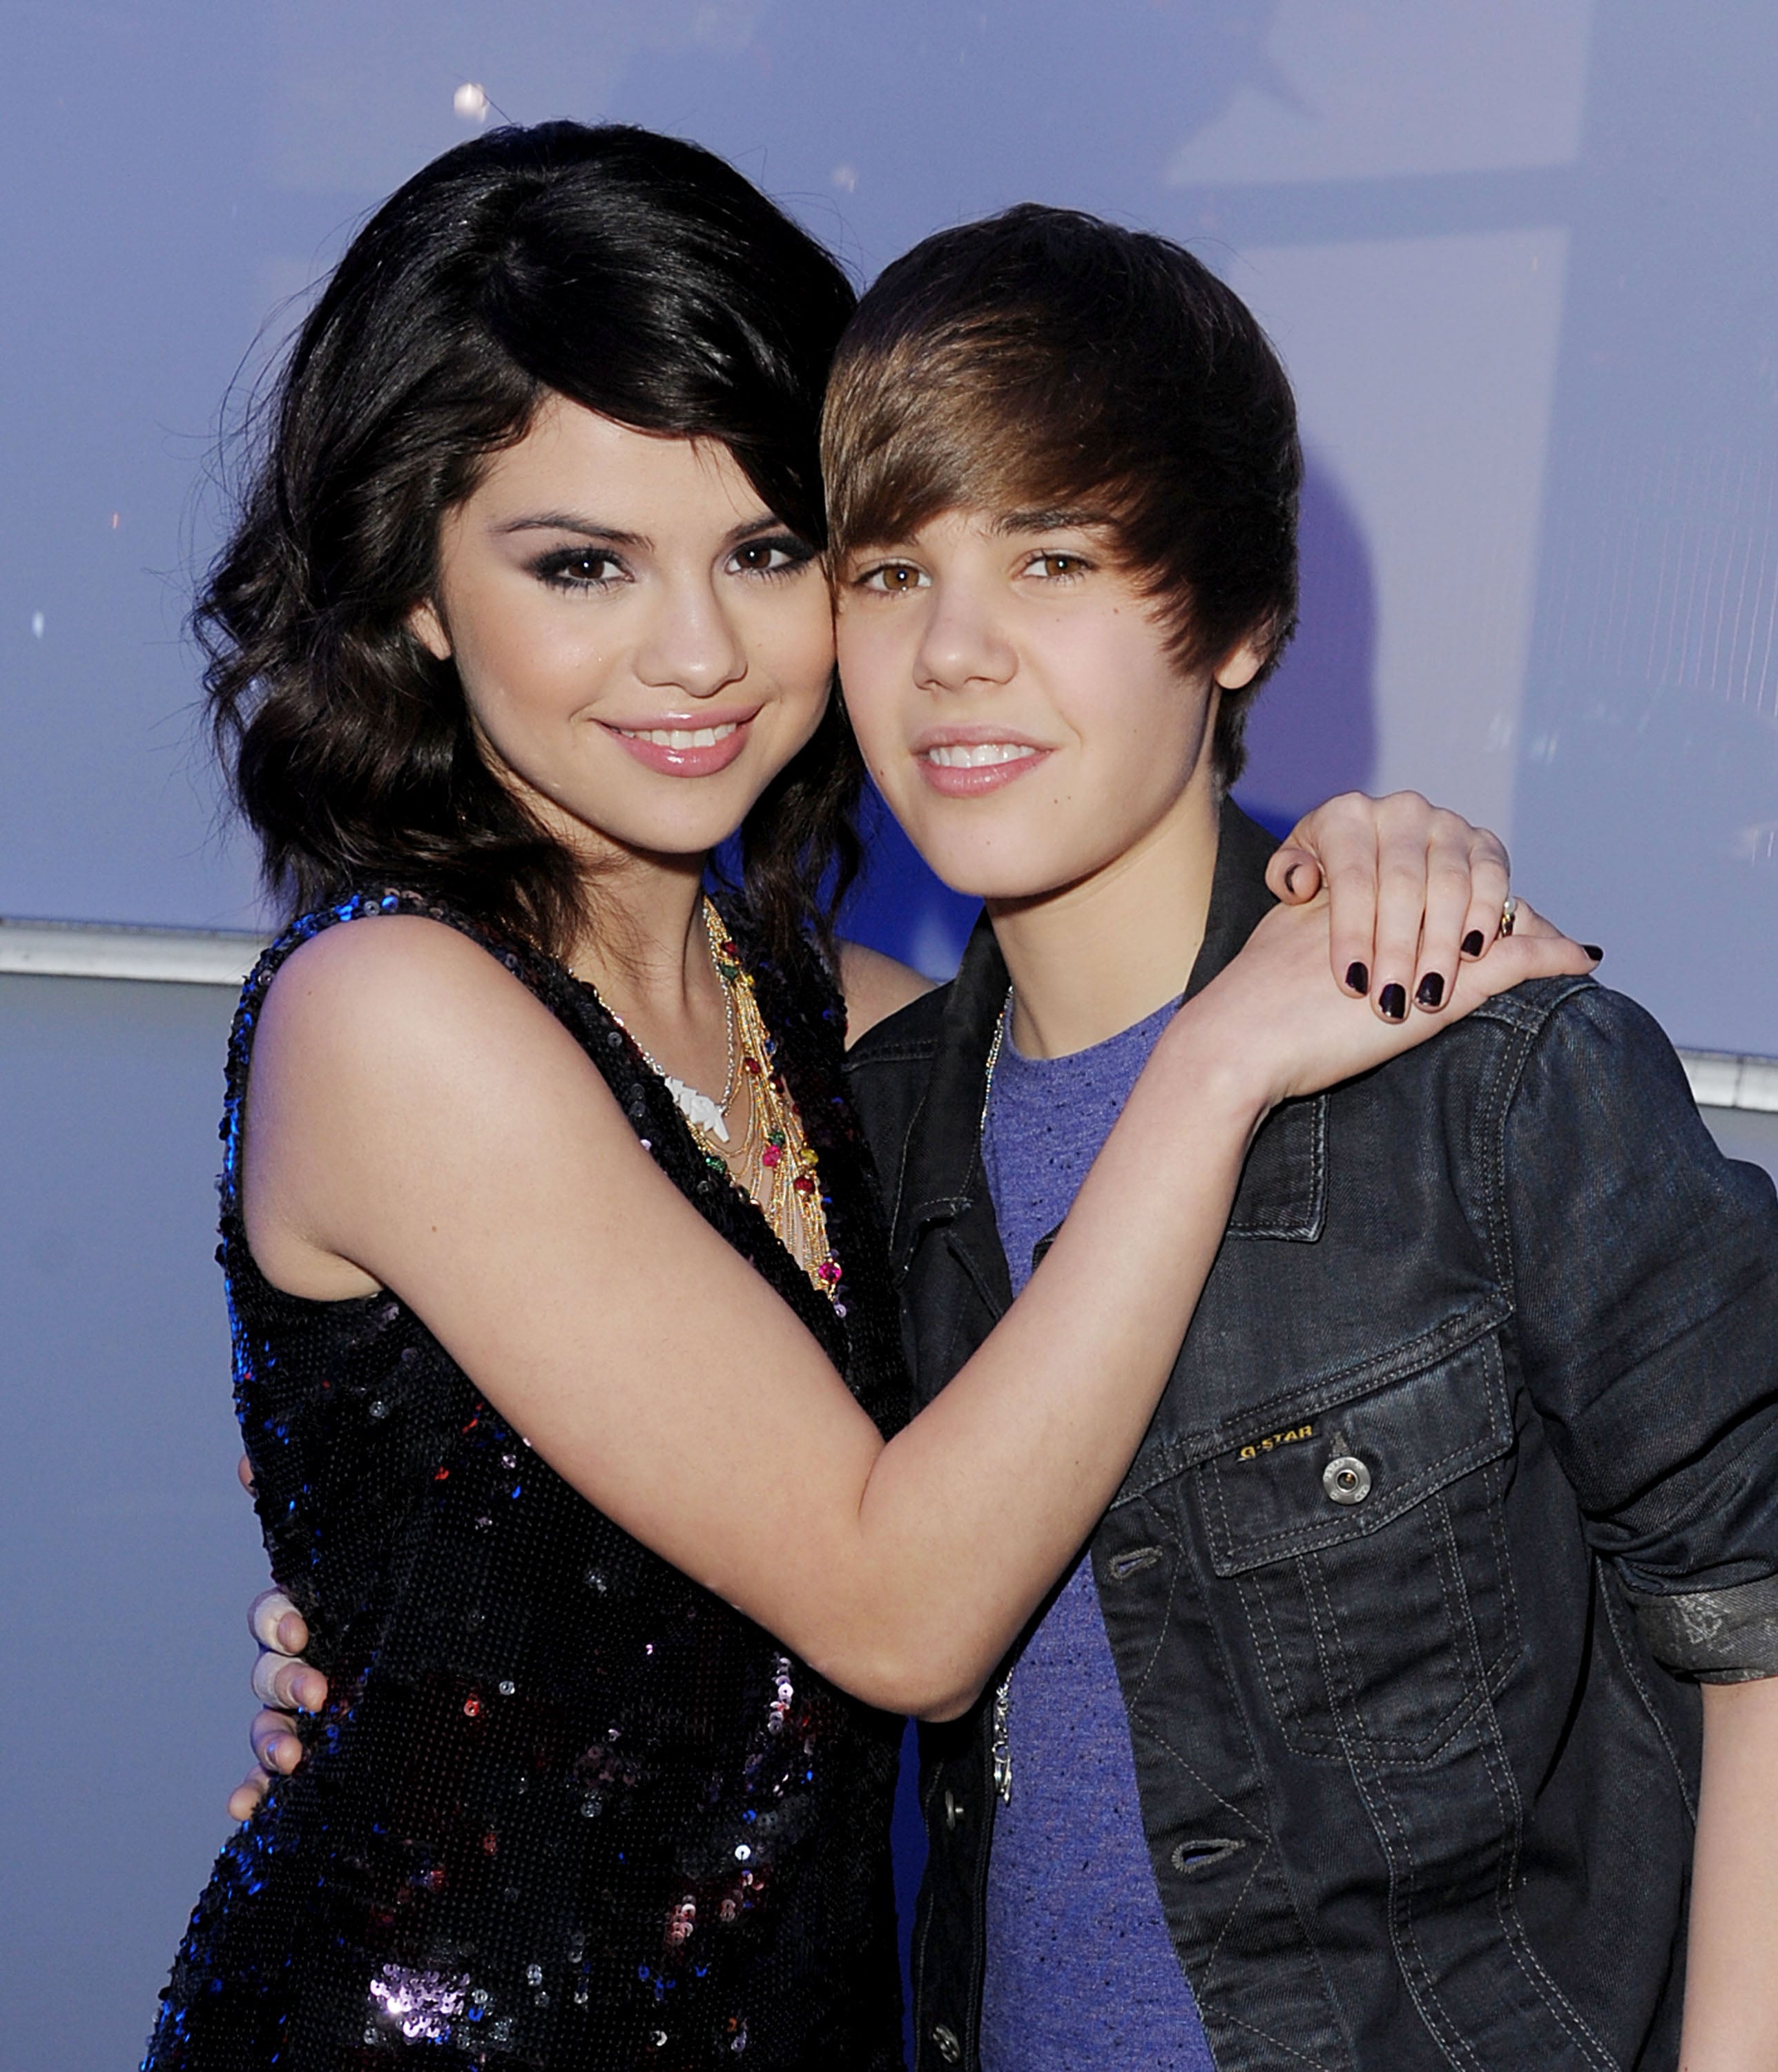 See What Justin Bieber + Selena Gomez's 'Children' Would Look Like